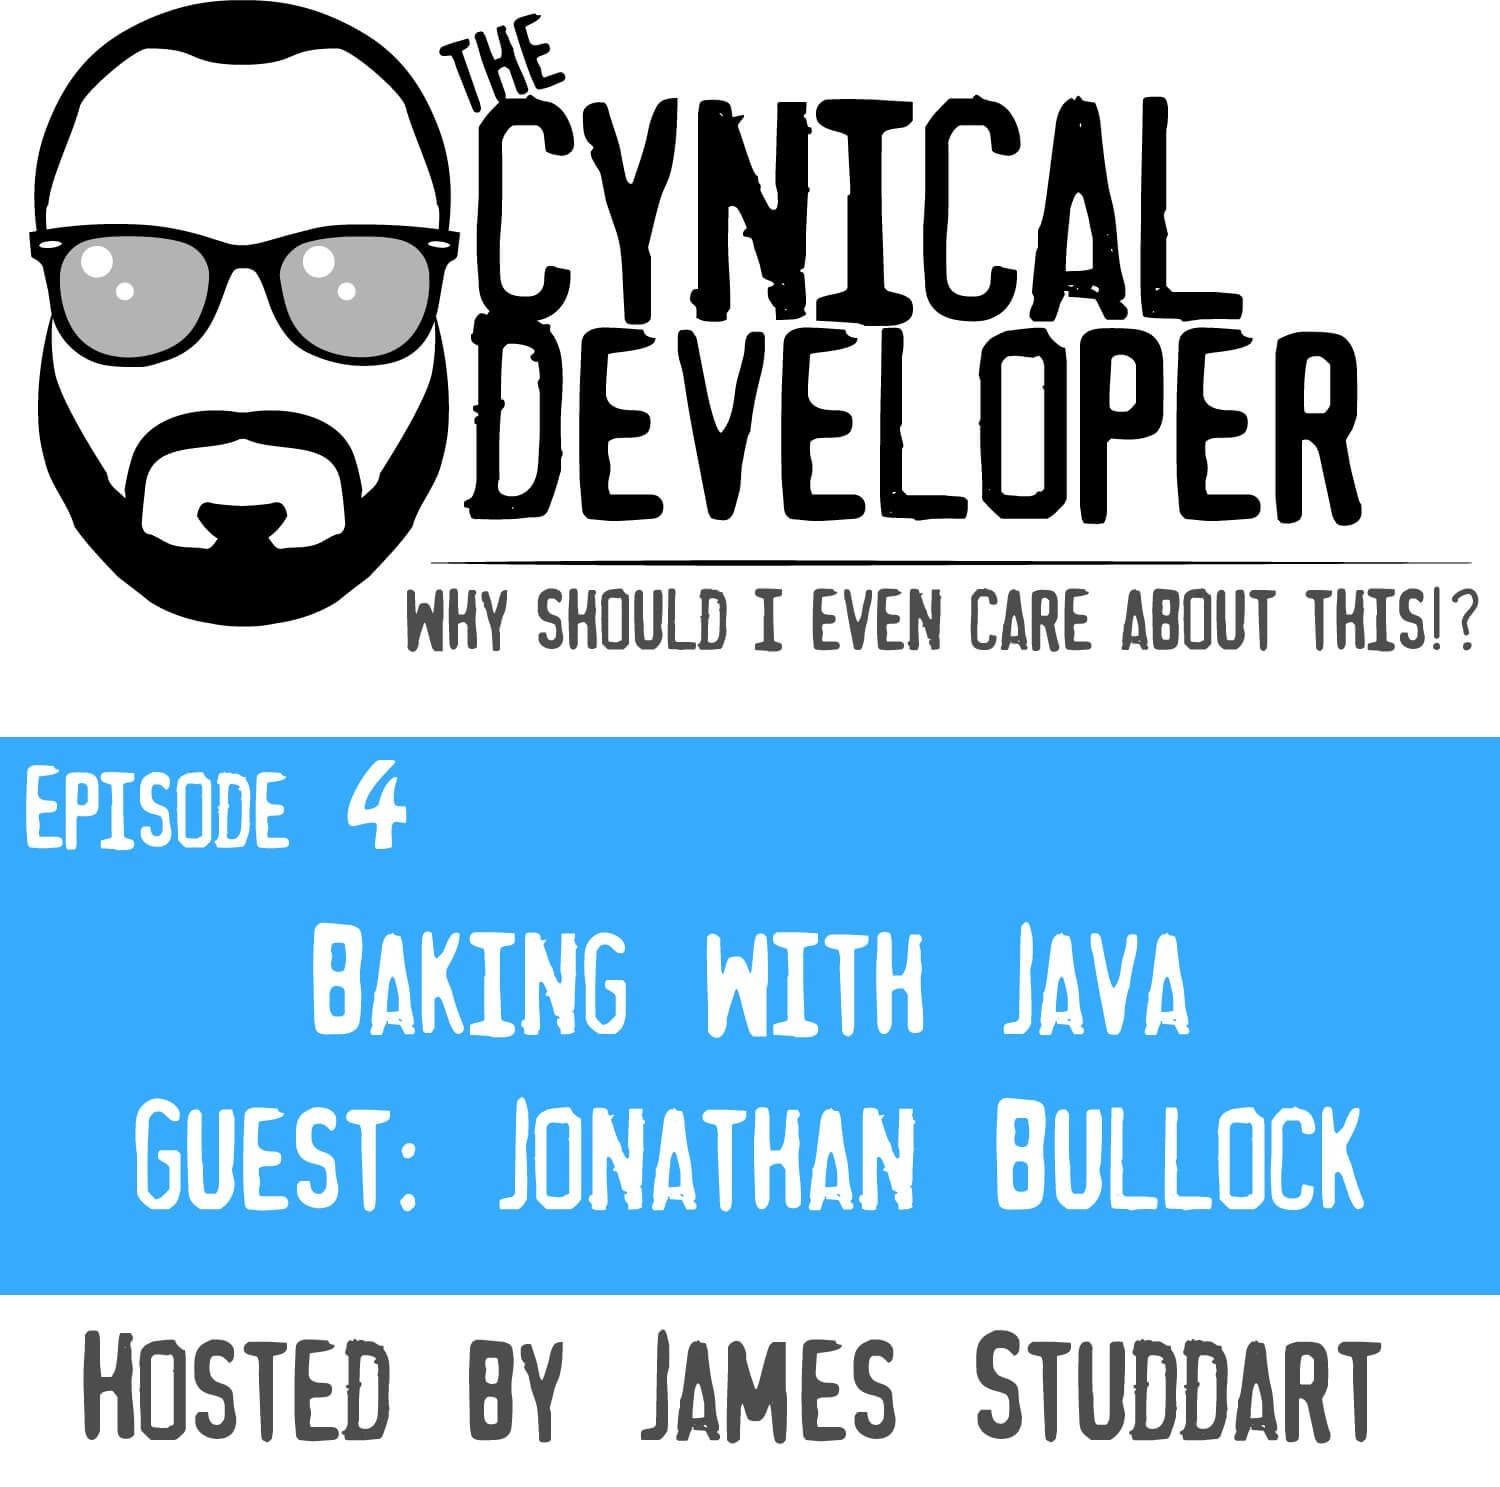 Episode 4 - Baking with Java